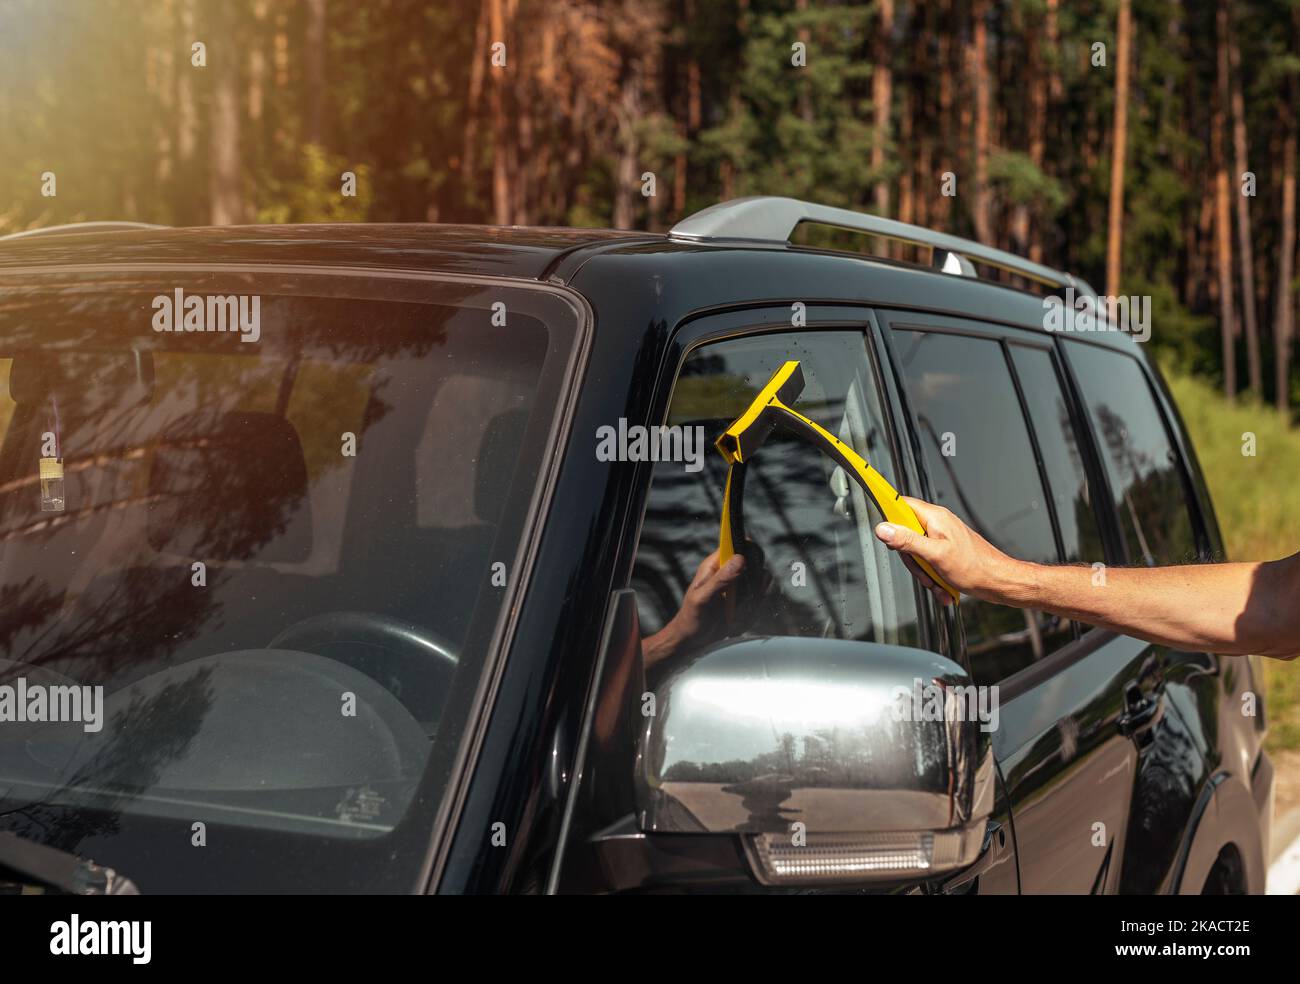 Hand with car rubber cleaner cleaning automobile window outdoors in summer. Stock Photo